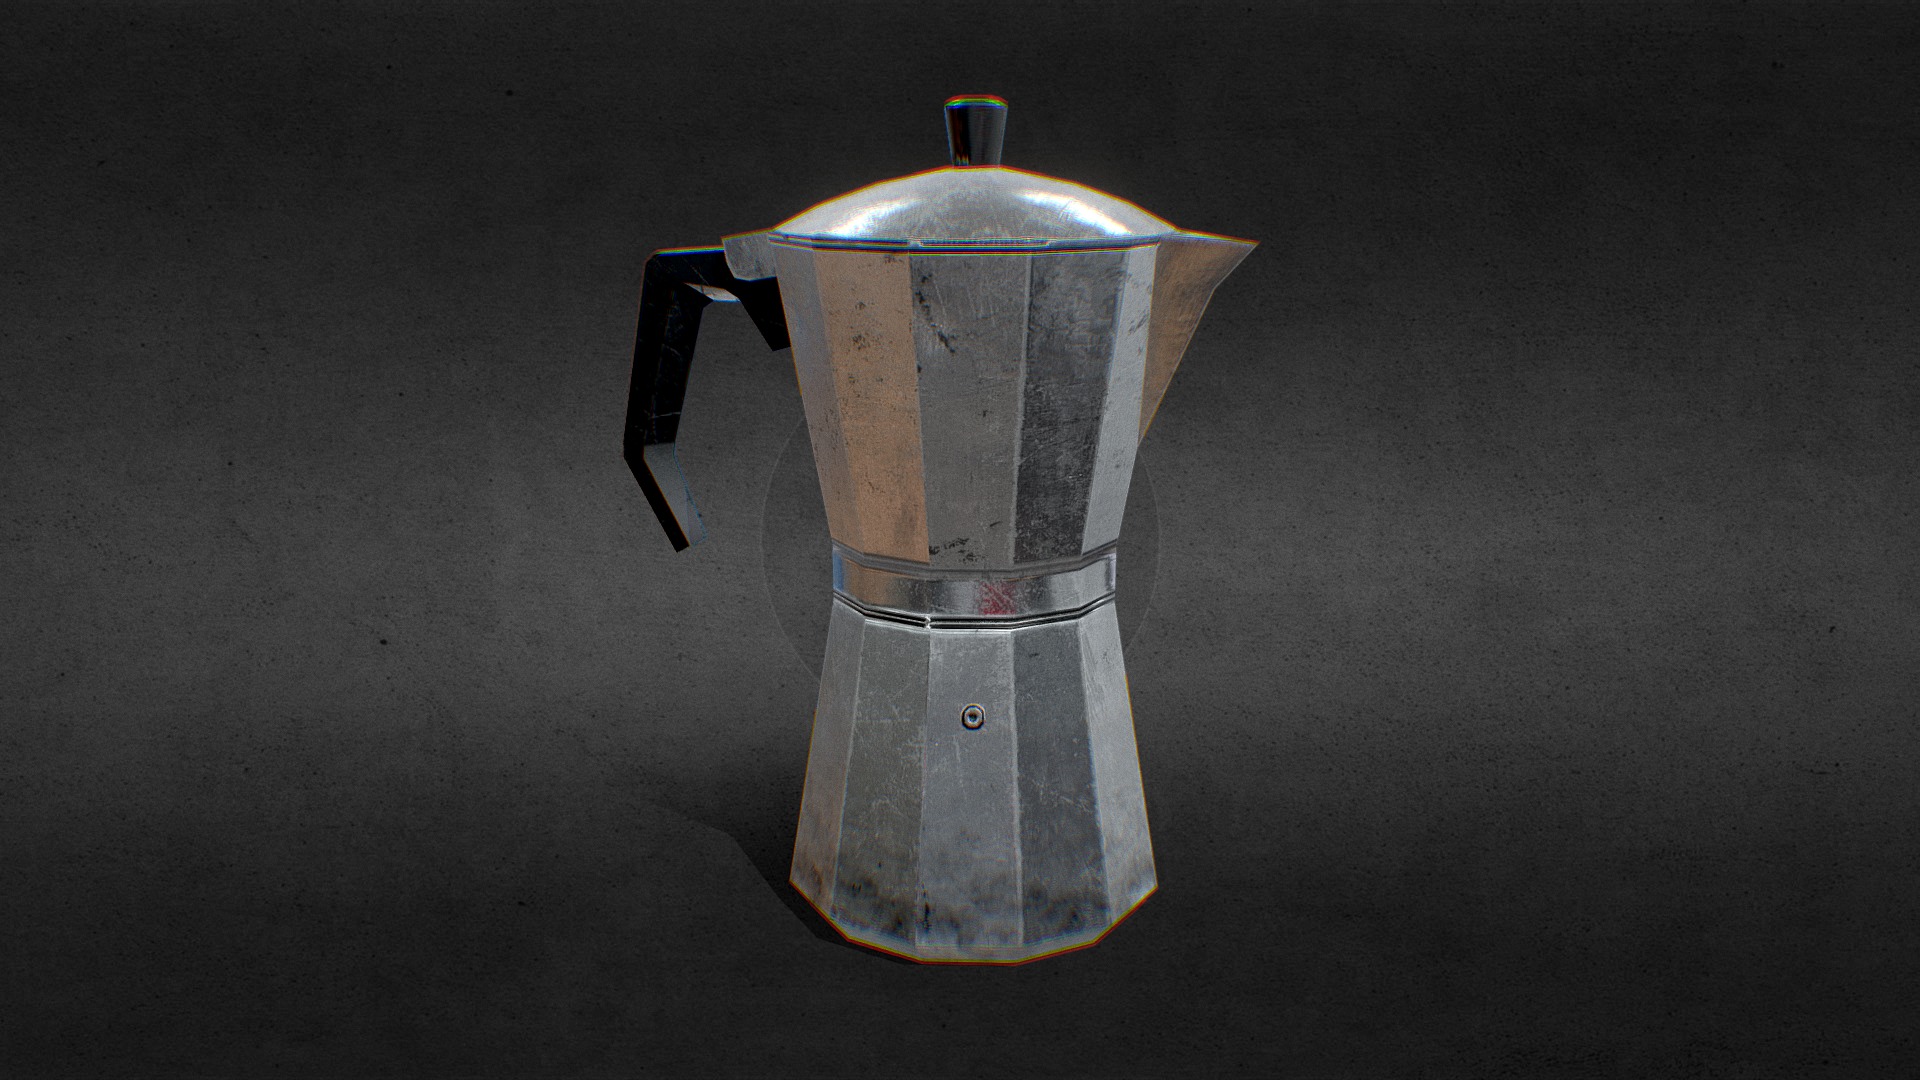 3D model Low Poly Italian Coffee Maker - This is a 3D model of the Low Poly Italian Coffee Maker. The 3D model is about a metal cylinder with a metal top.